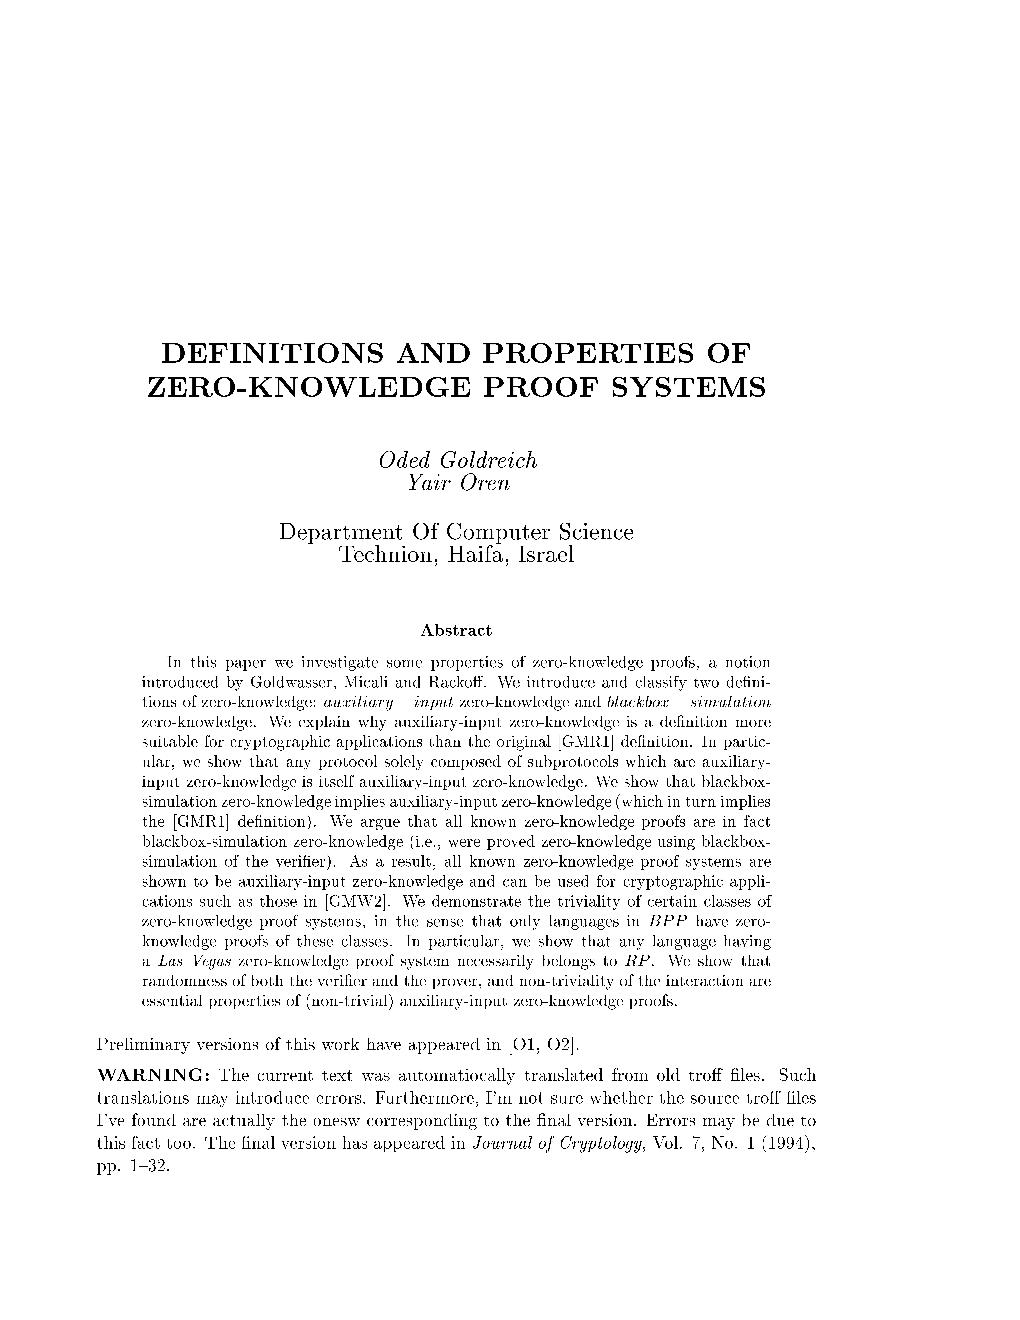 Definitions and Properties of Zero-Knowledge Proof